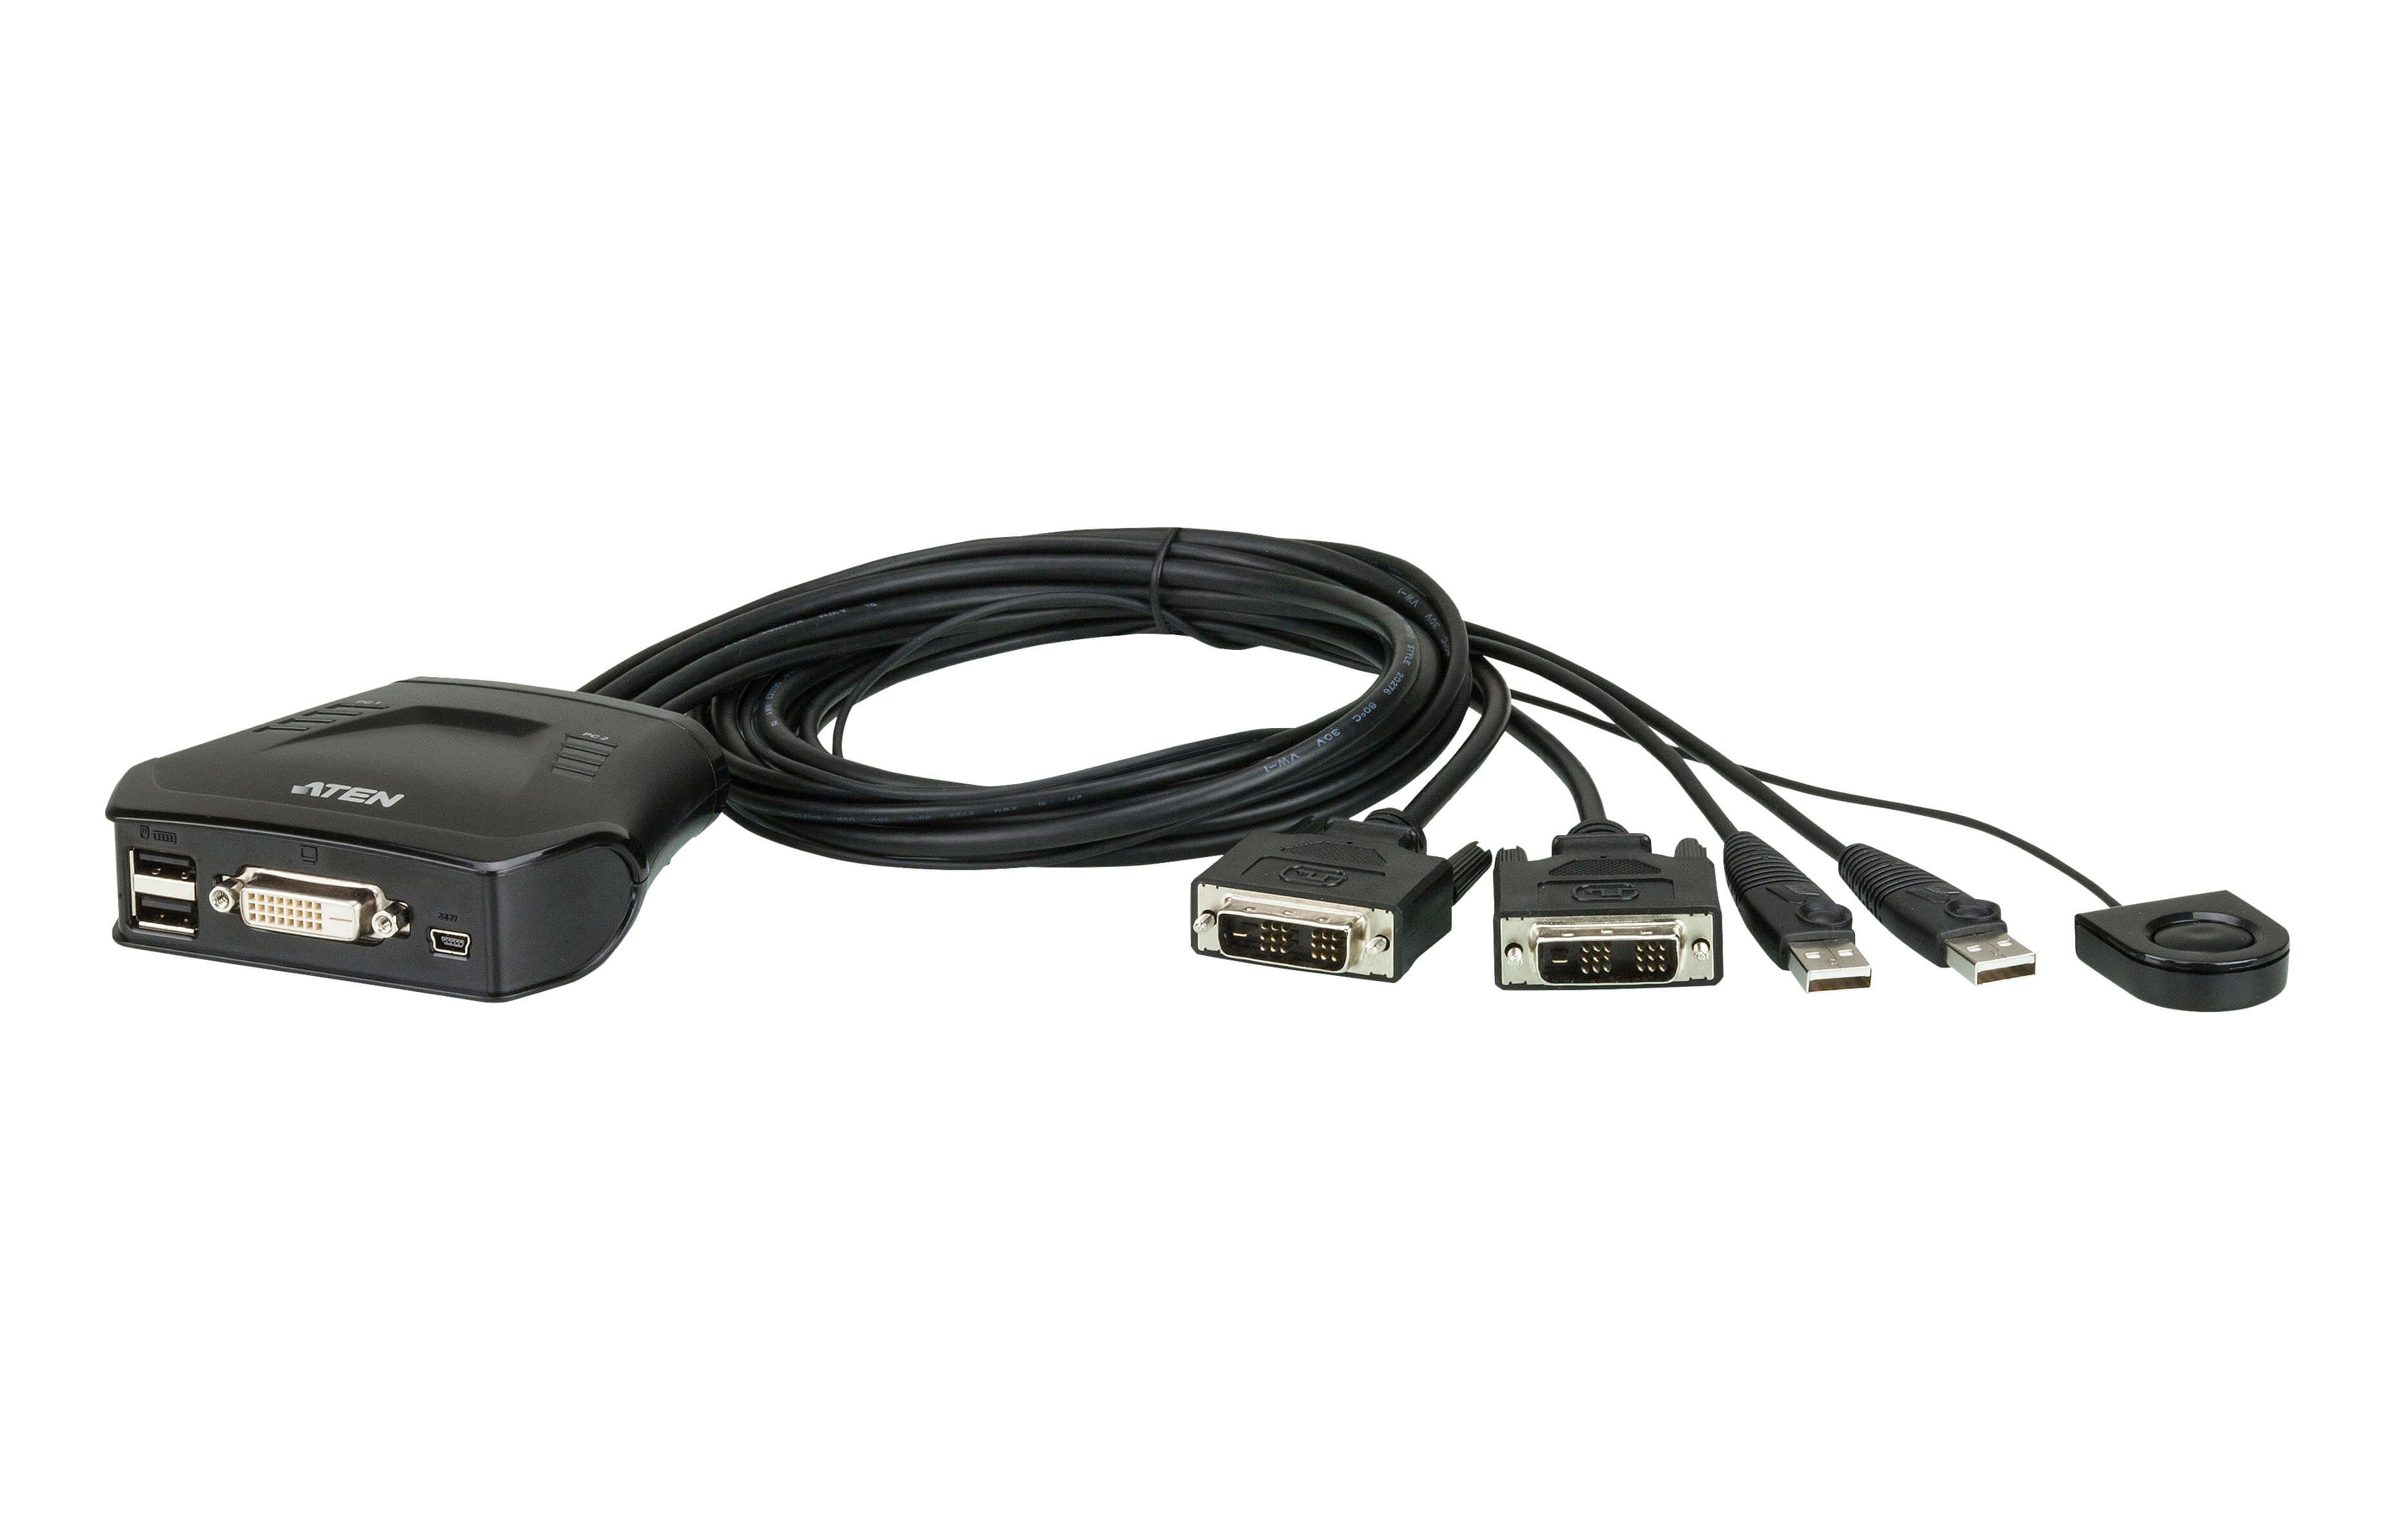 KVM Switches/Aten: Aten, Compact, KVM, Switch, 2, Port, Single, Display, DVI, Remote, Port, Selector, USB, Hot-Plugging, 